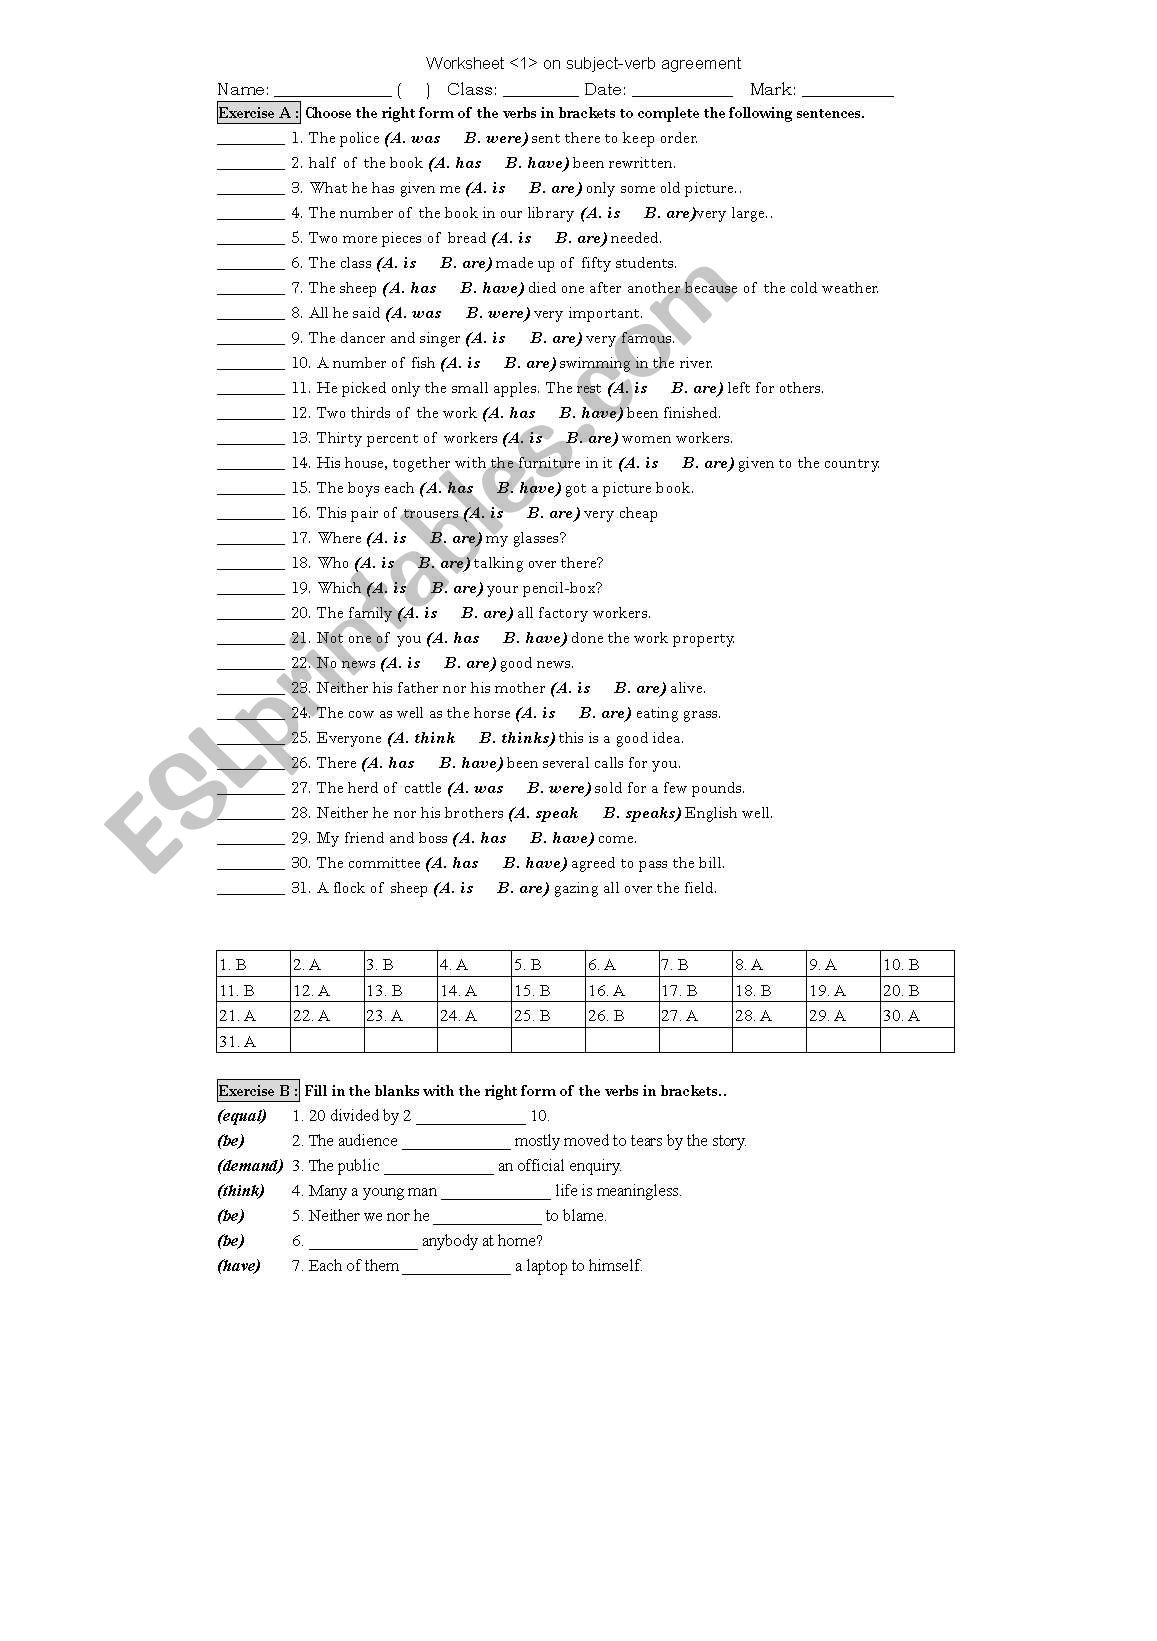 worksheet on subject verb agtreement (with key)